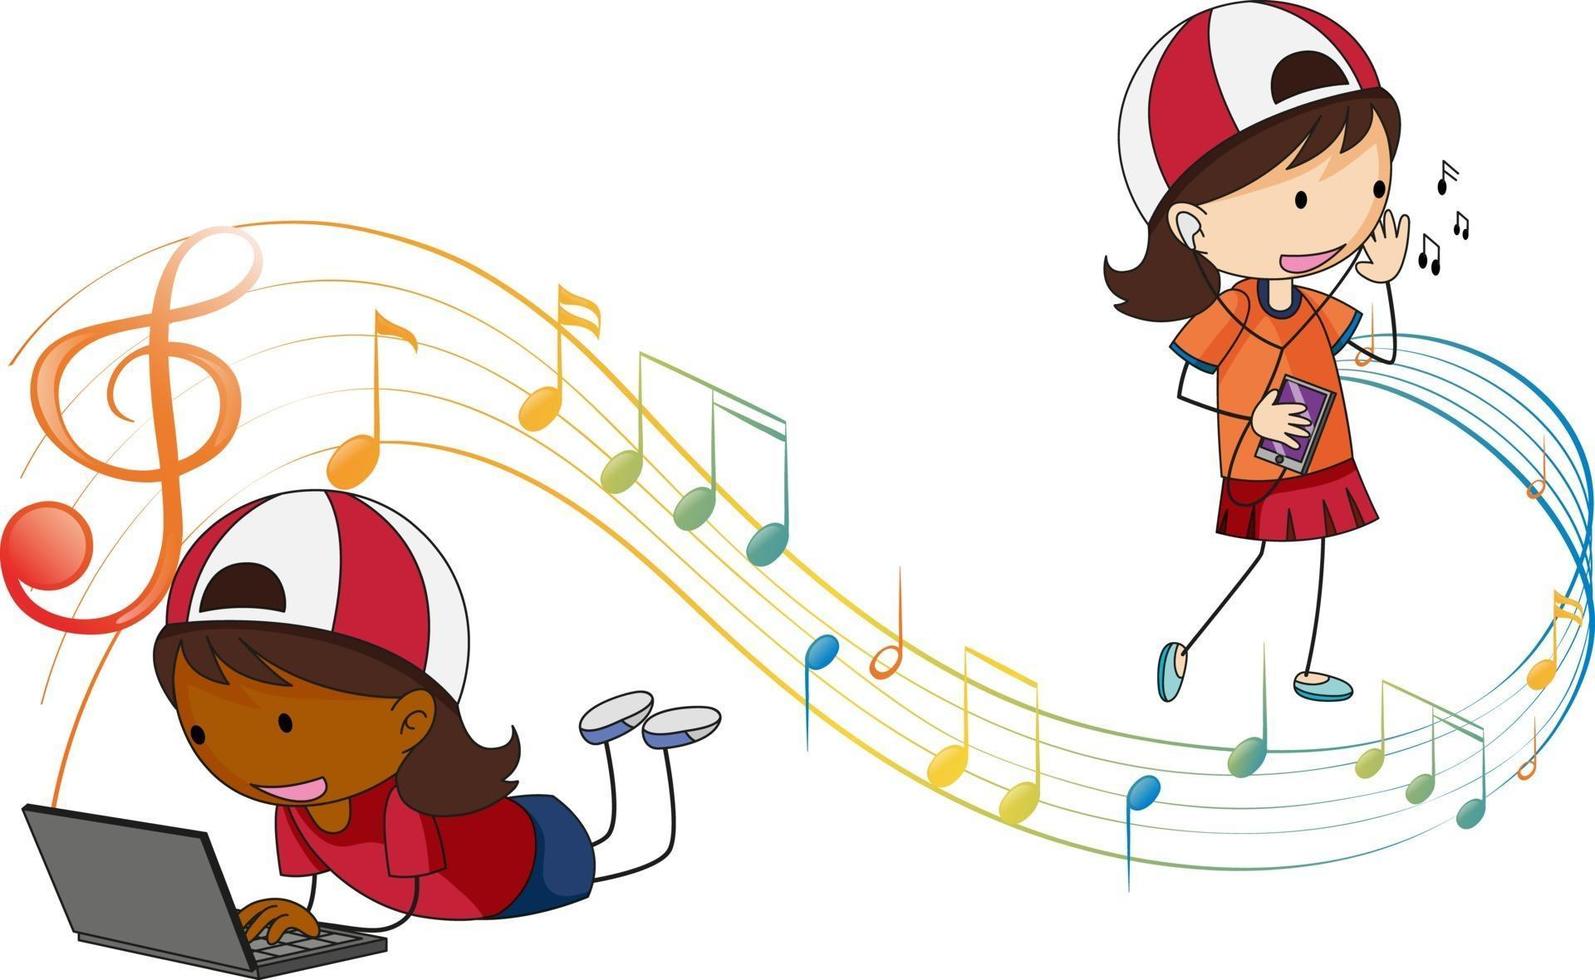 Doodle cartoon character of girls listening music with musical melody symbols vector